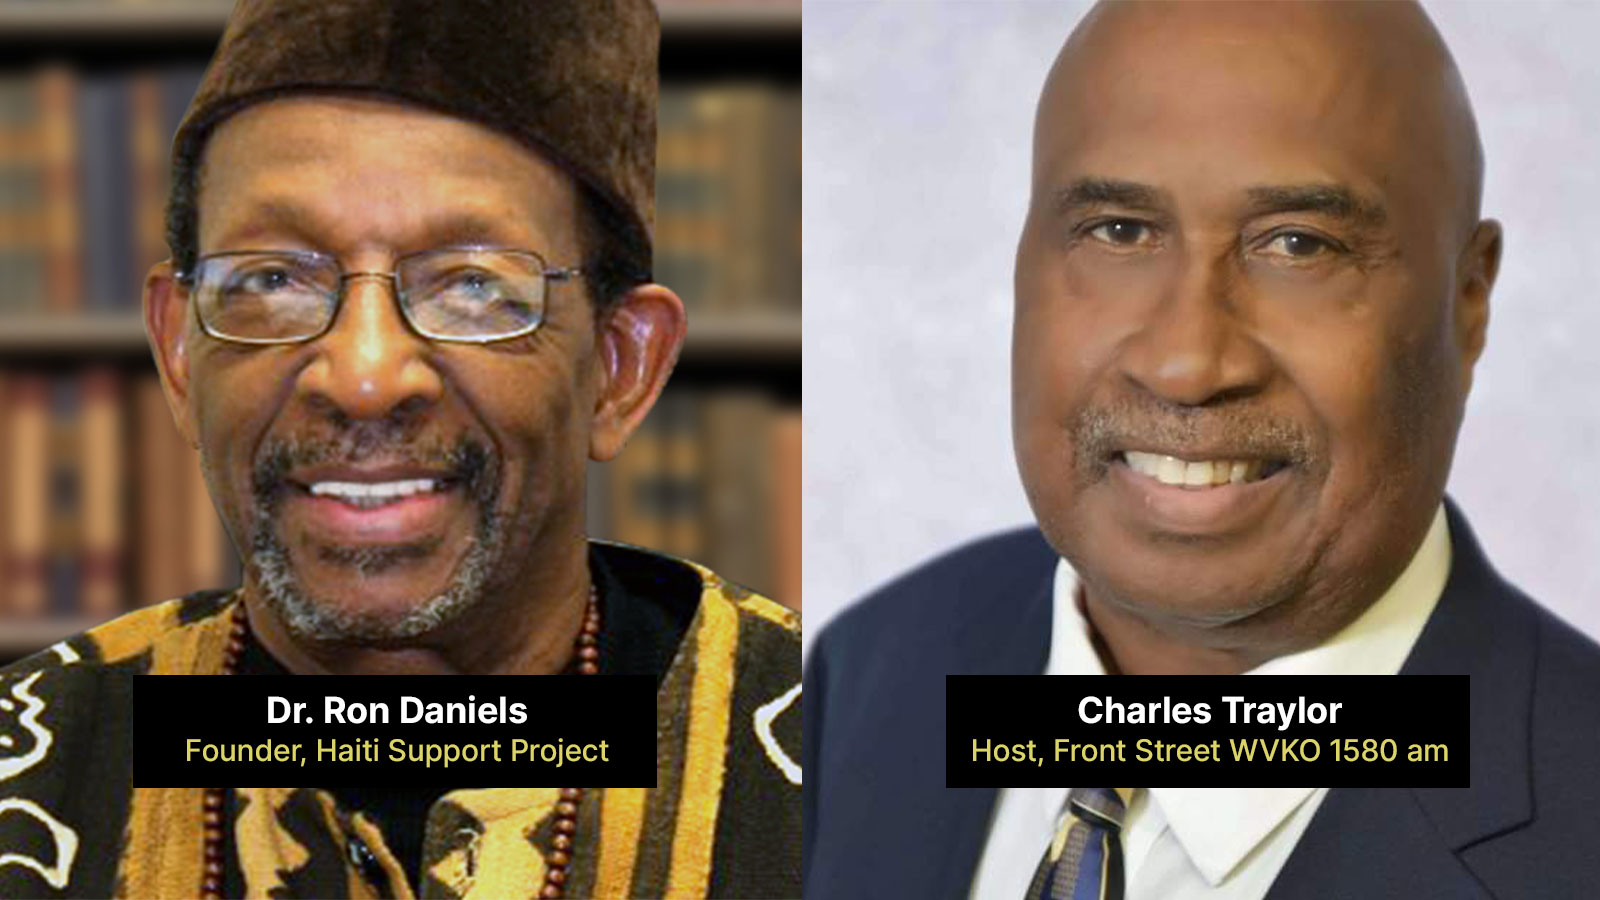 Front Street host Charles Traylor discusses Haiti with Dr. Ron Daniels